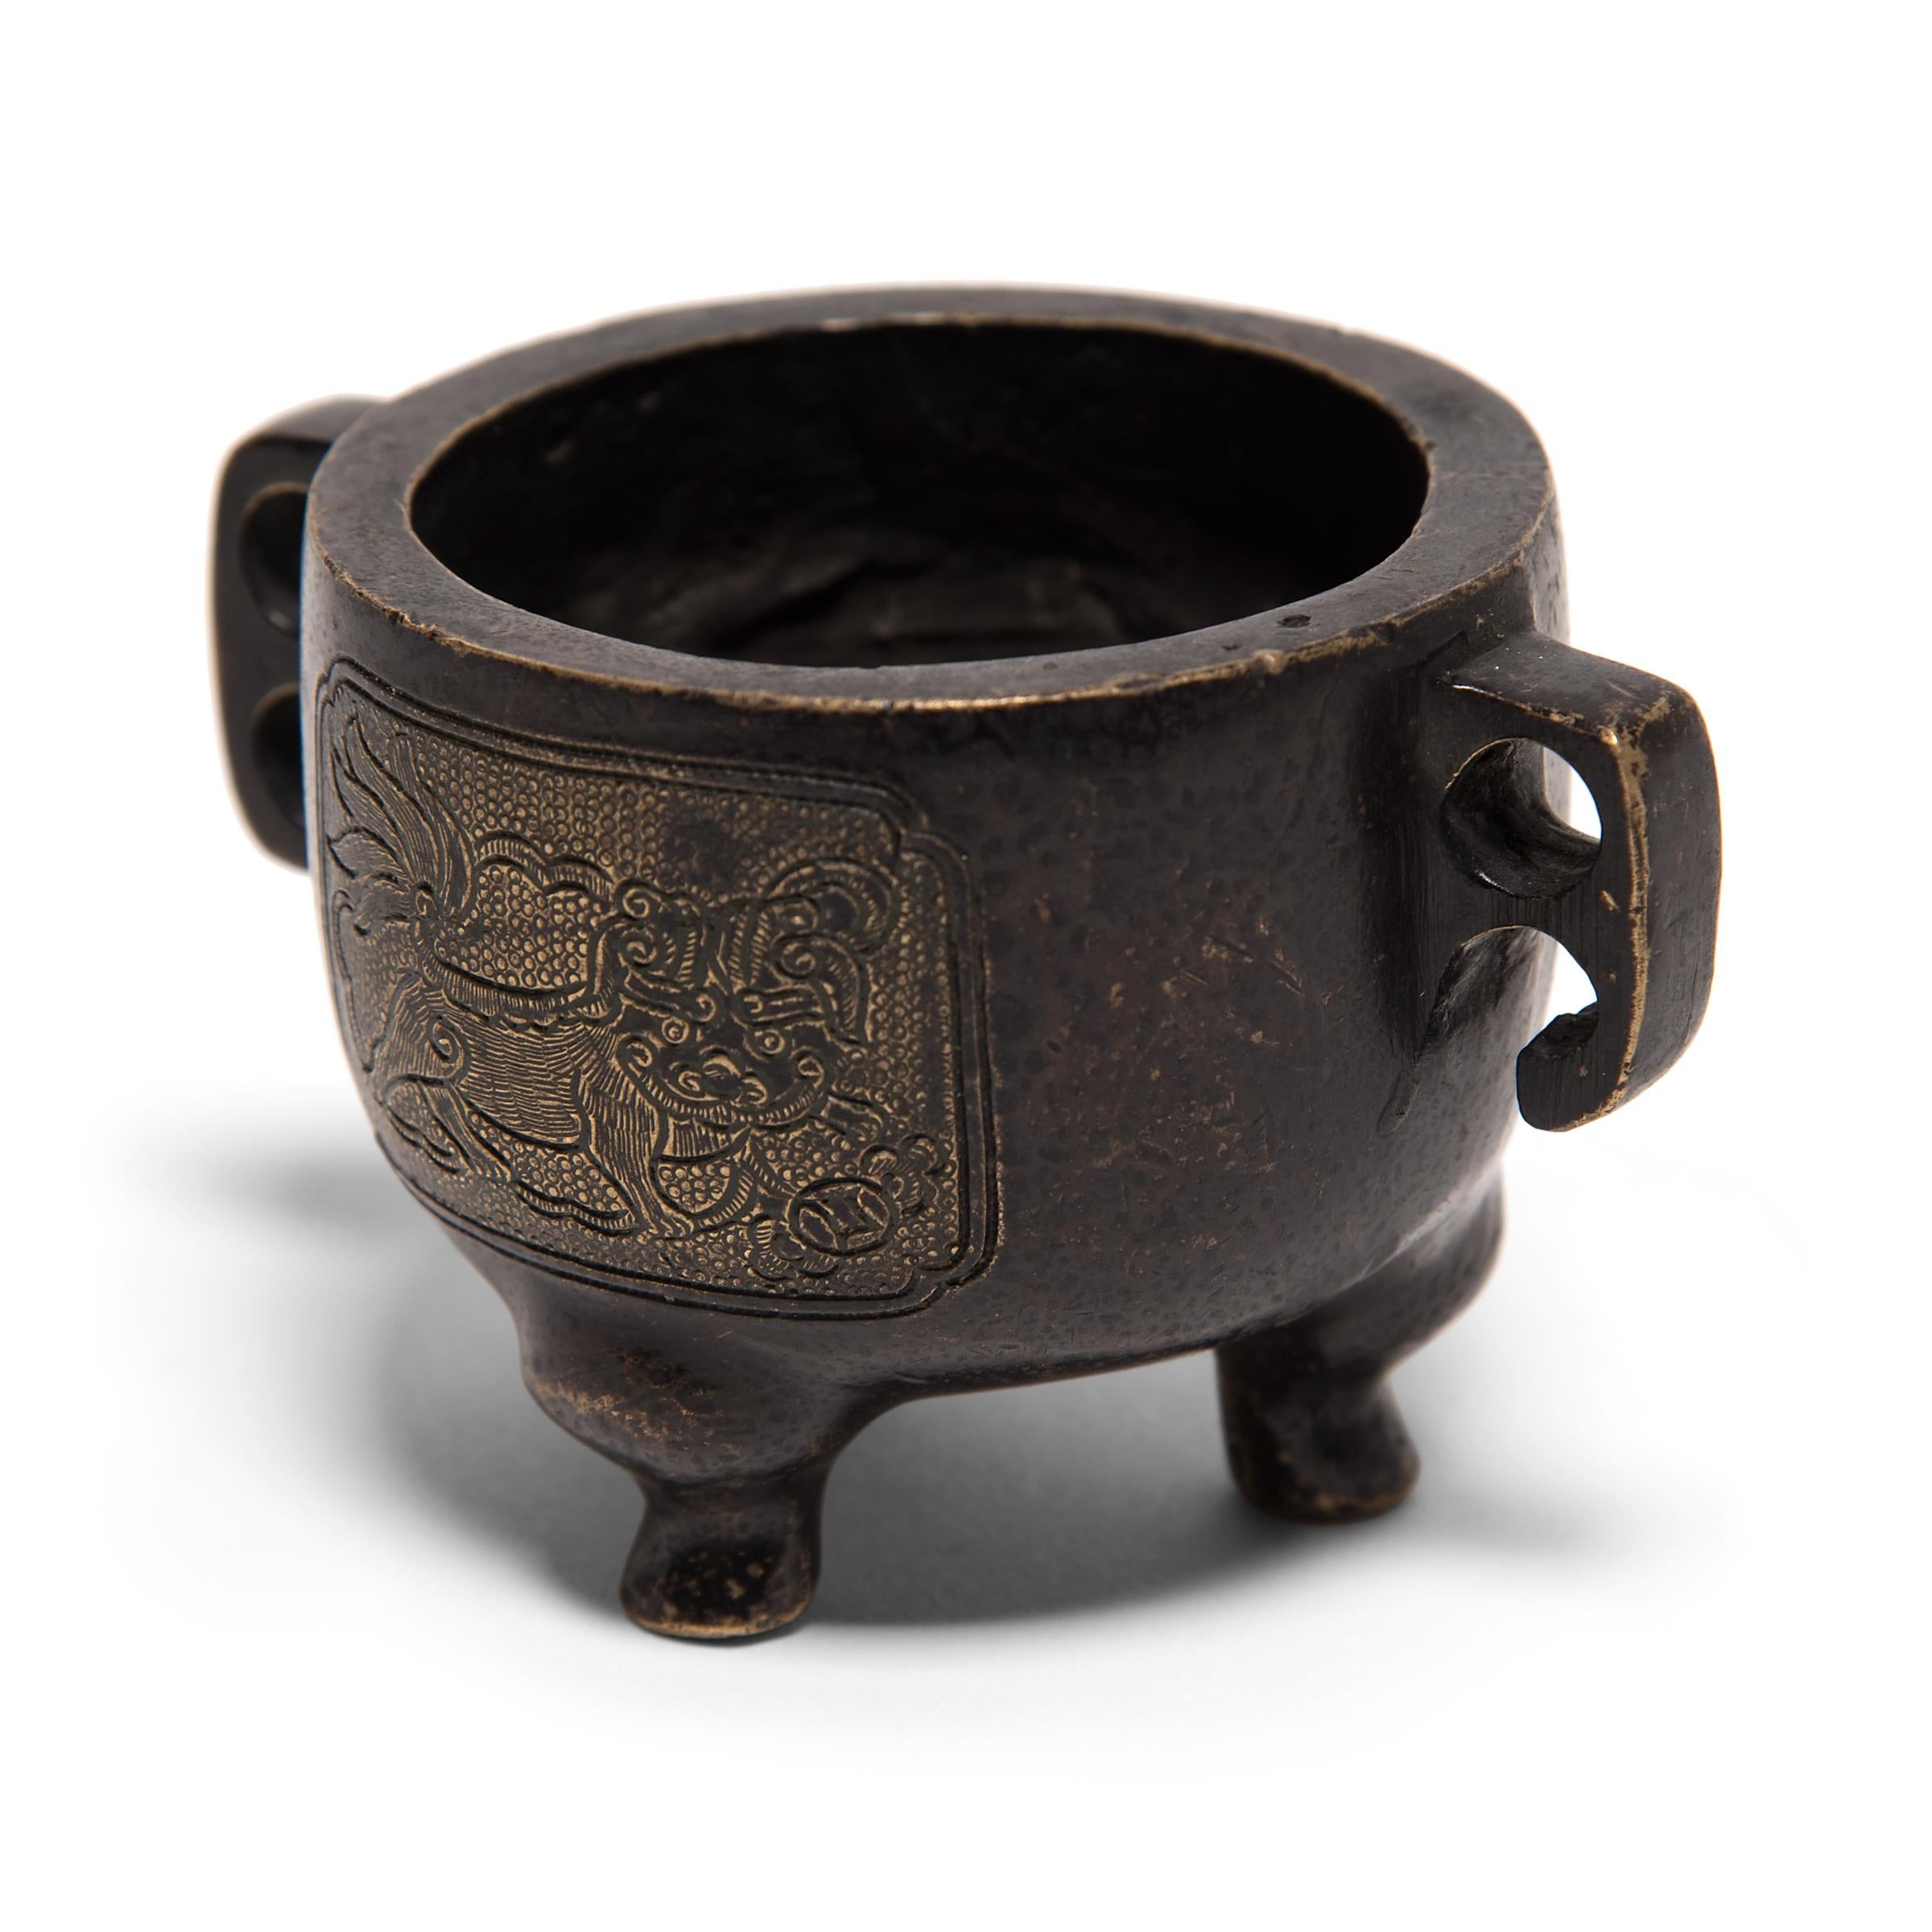 Censer bowls are designed to hold burning incense, and have been used in China for thousands of years. Incense was made from dried aromatic plants and essential oils and had different uses: to perfume sheets or clothes, as a way to warm your hands